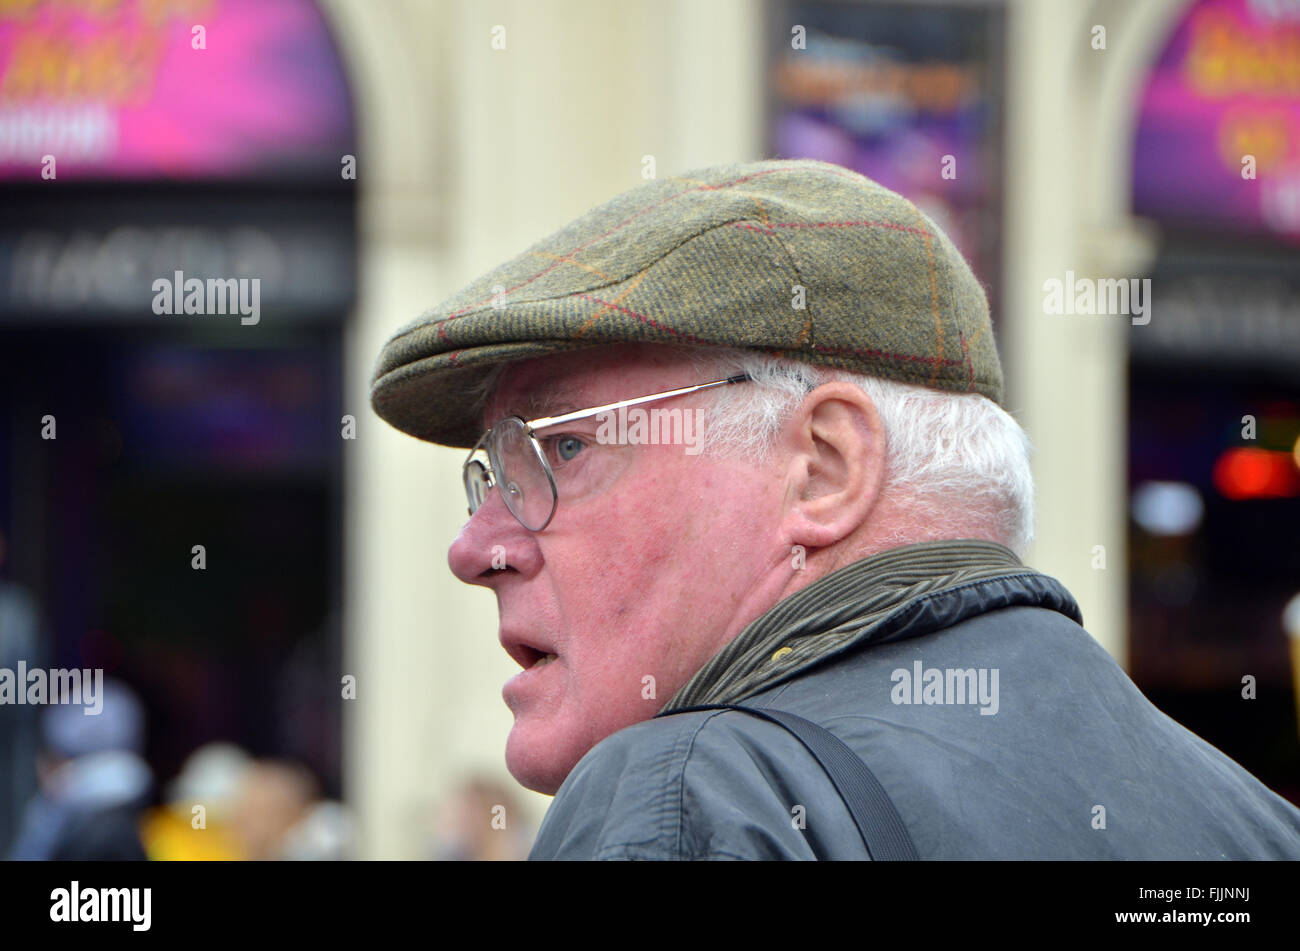 London, UK, 2 March 2016, Grey haired man wearing wax jacket and  flat cap in Piccadilly Circus. Stock Photo